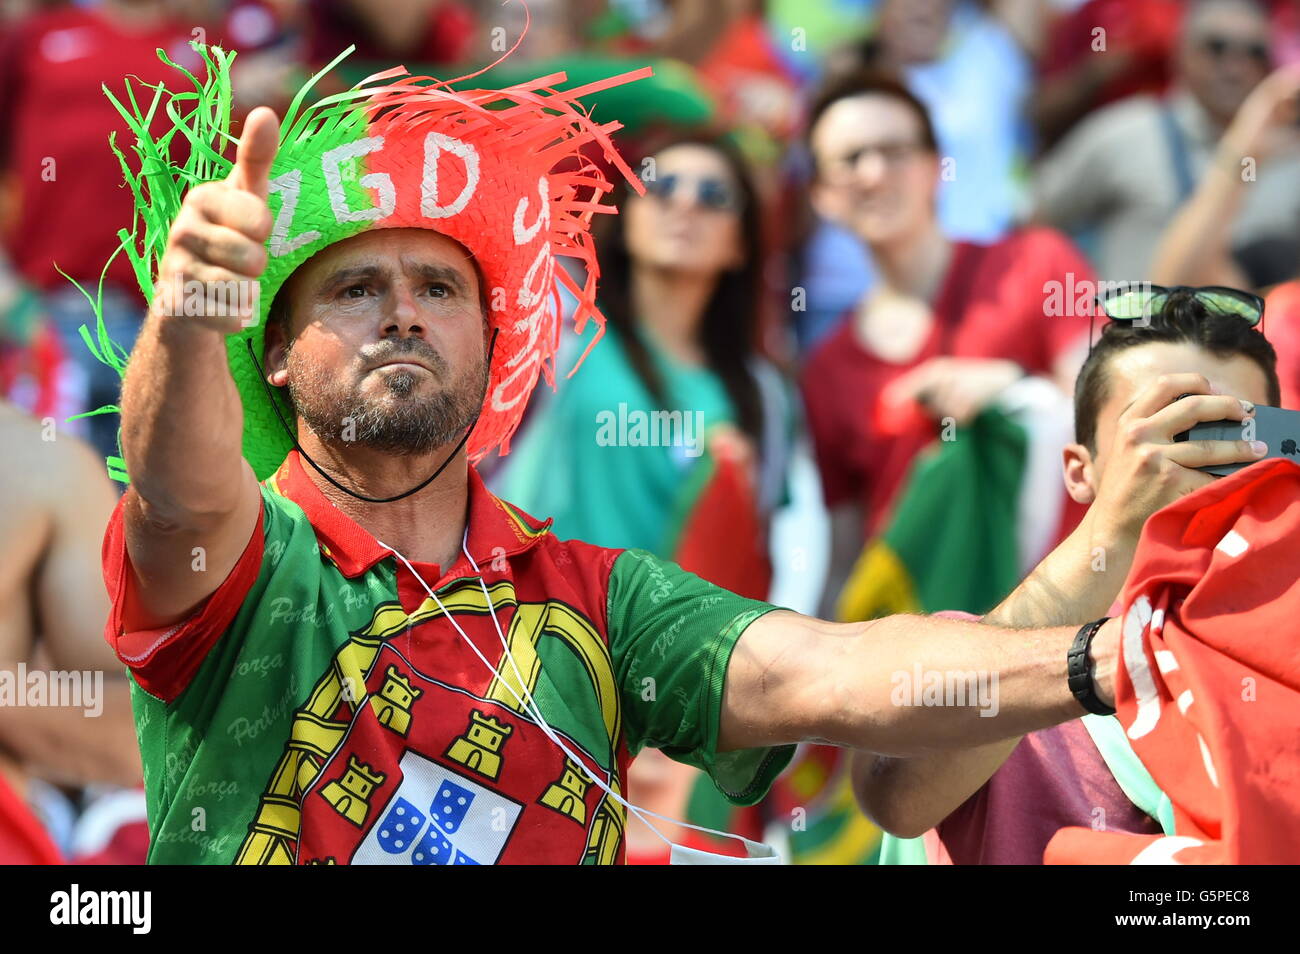 Lyon, France. 22nd June, 2016. Supporters of Portugal cheer prior to the UEFA Euro 2016 Group F soccer match between Hungary and Portugal at the Stade de Lyon in Lyon, France, 22 June 2016. Photo: Uwe Anspach/dpa/Alamy Live News Stock Photo